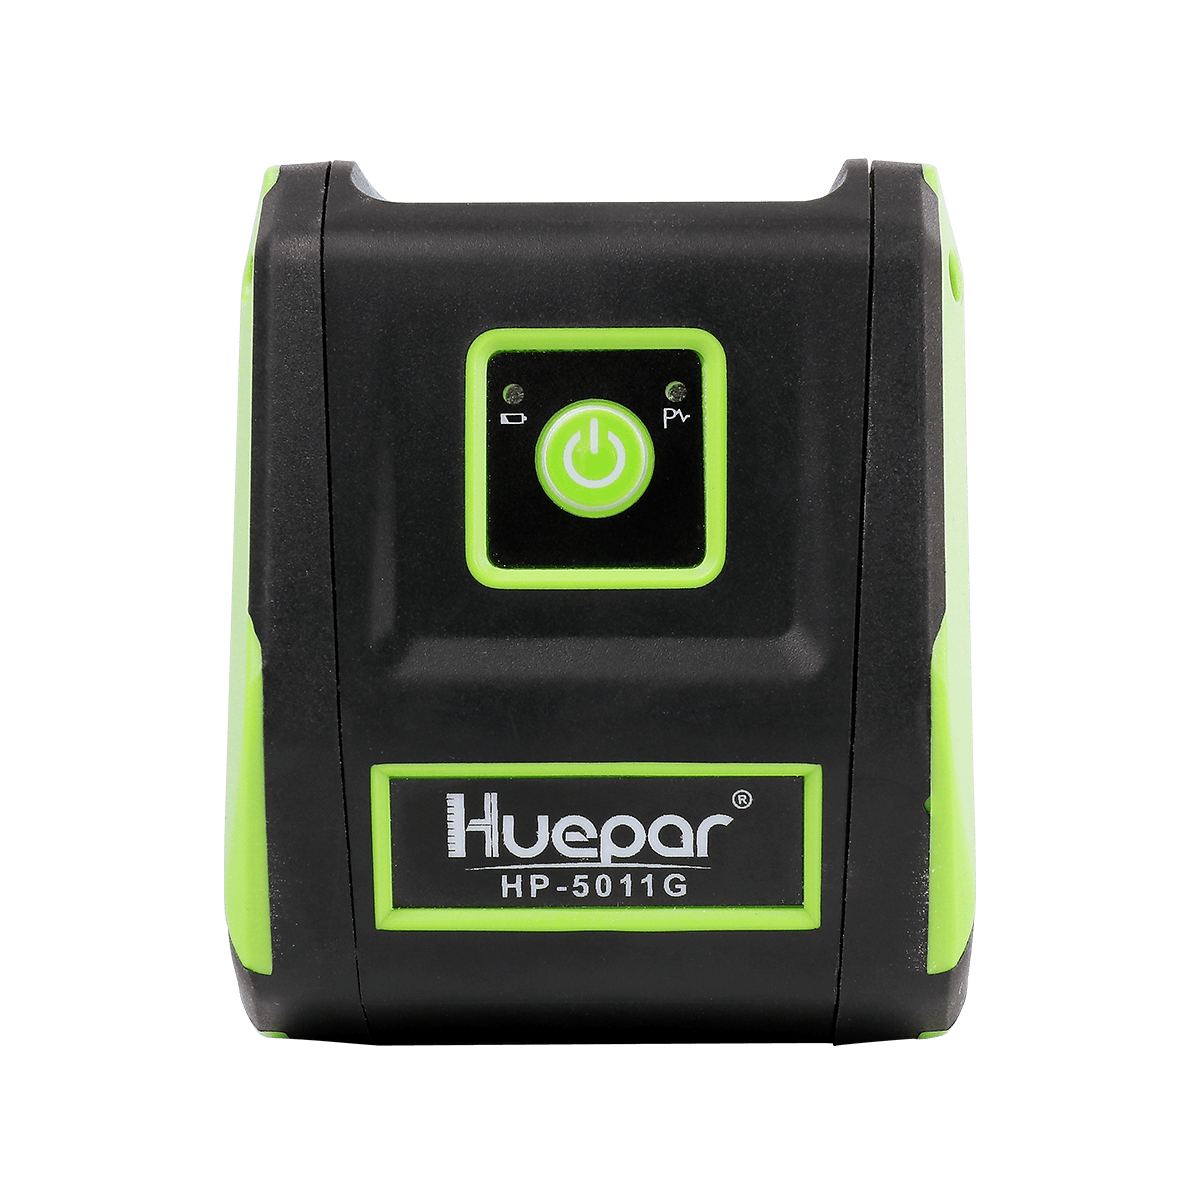 Huepar Laser Distance Measure 393Ft/120M with Li-ion Battery & Electric  Angle Sensor, Backlit LCD Laser Measure M/In/Ft with Multi-Measurement  Modes, Pythagorean, Distance, Area&Volume-LM120A price in UAE,  UAE